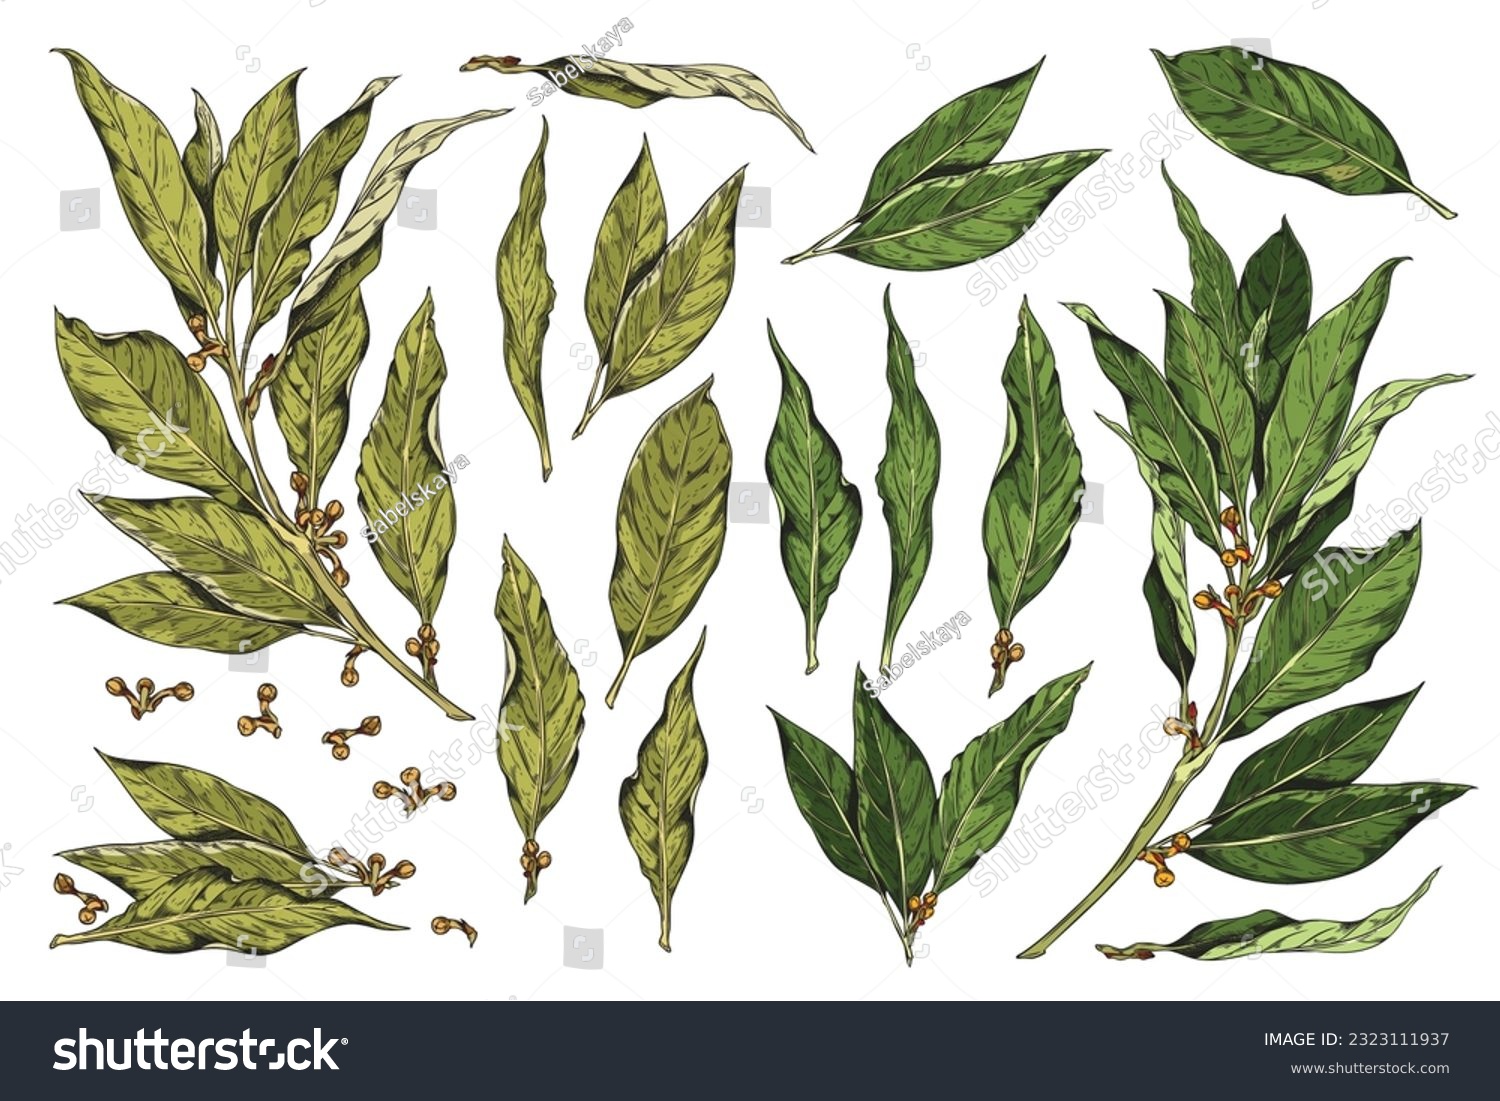 SVG of Vector set hand drawn branch of bay leaf, dry bay leave with corns, pepper. Vintage collection on white background. Herbs, spices, natural flavors concept great for packaging, textile, fabric svg